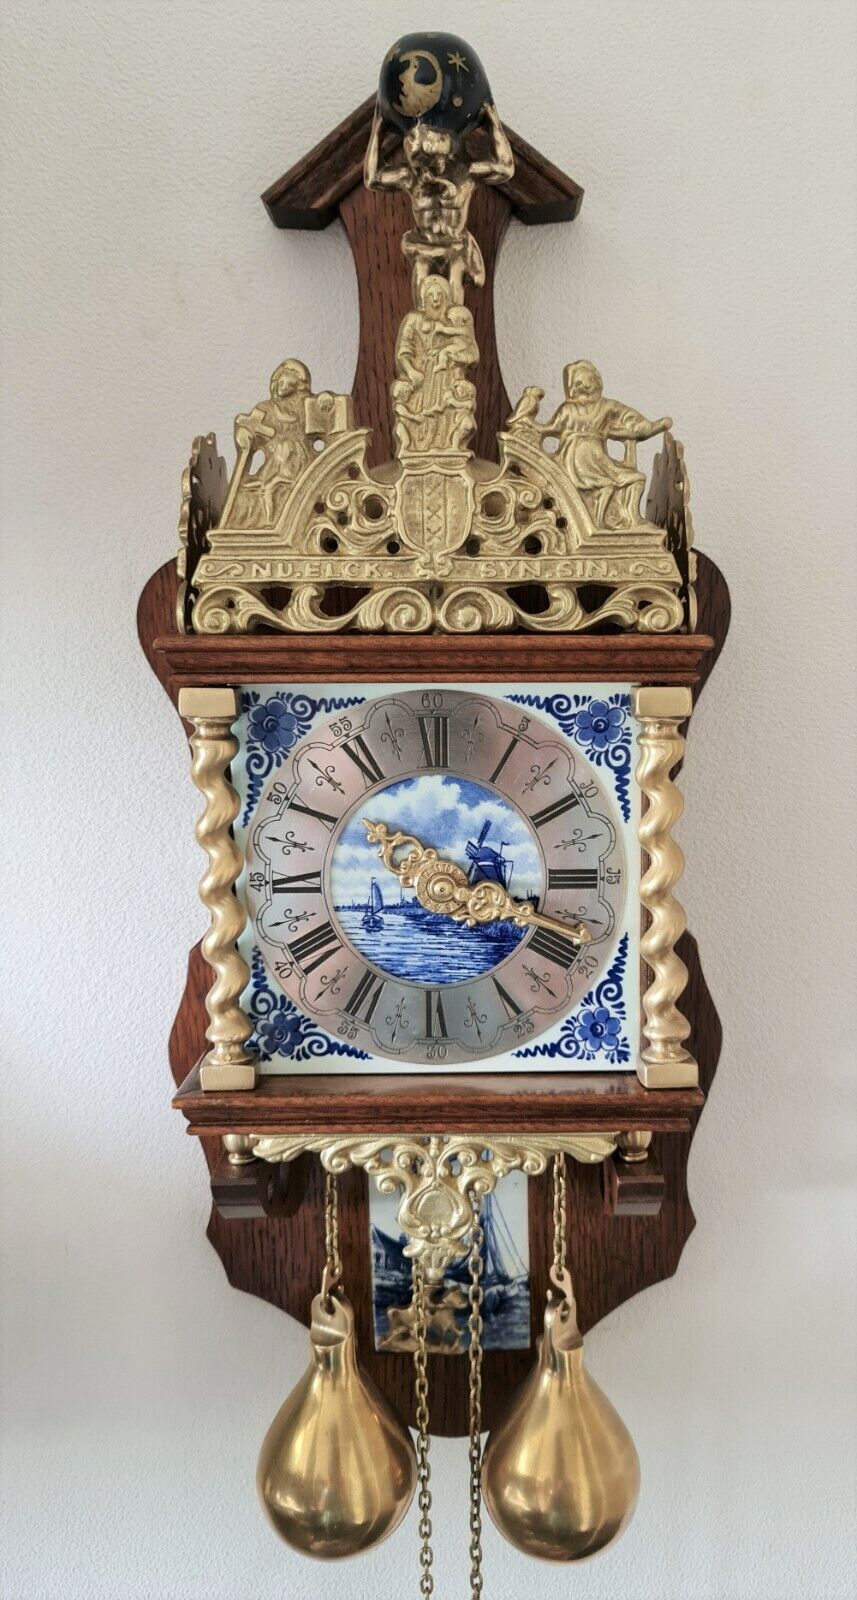 Rare Clock Dutch Zaanse 8 Day Wall Clock With Delft Blue And White Tiles 1971